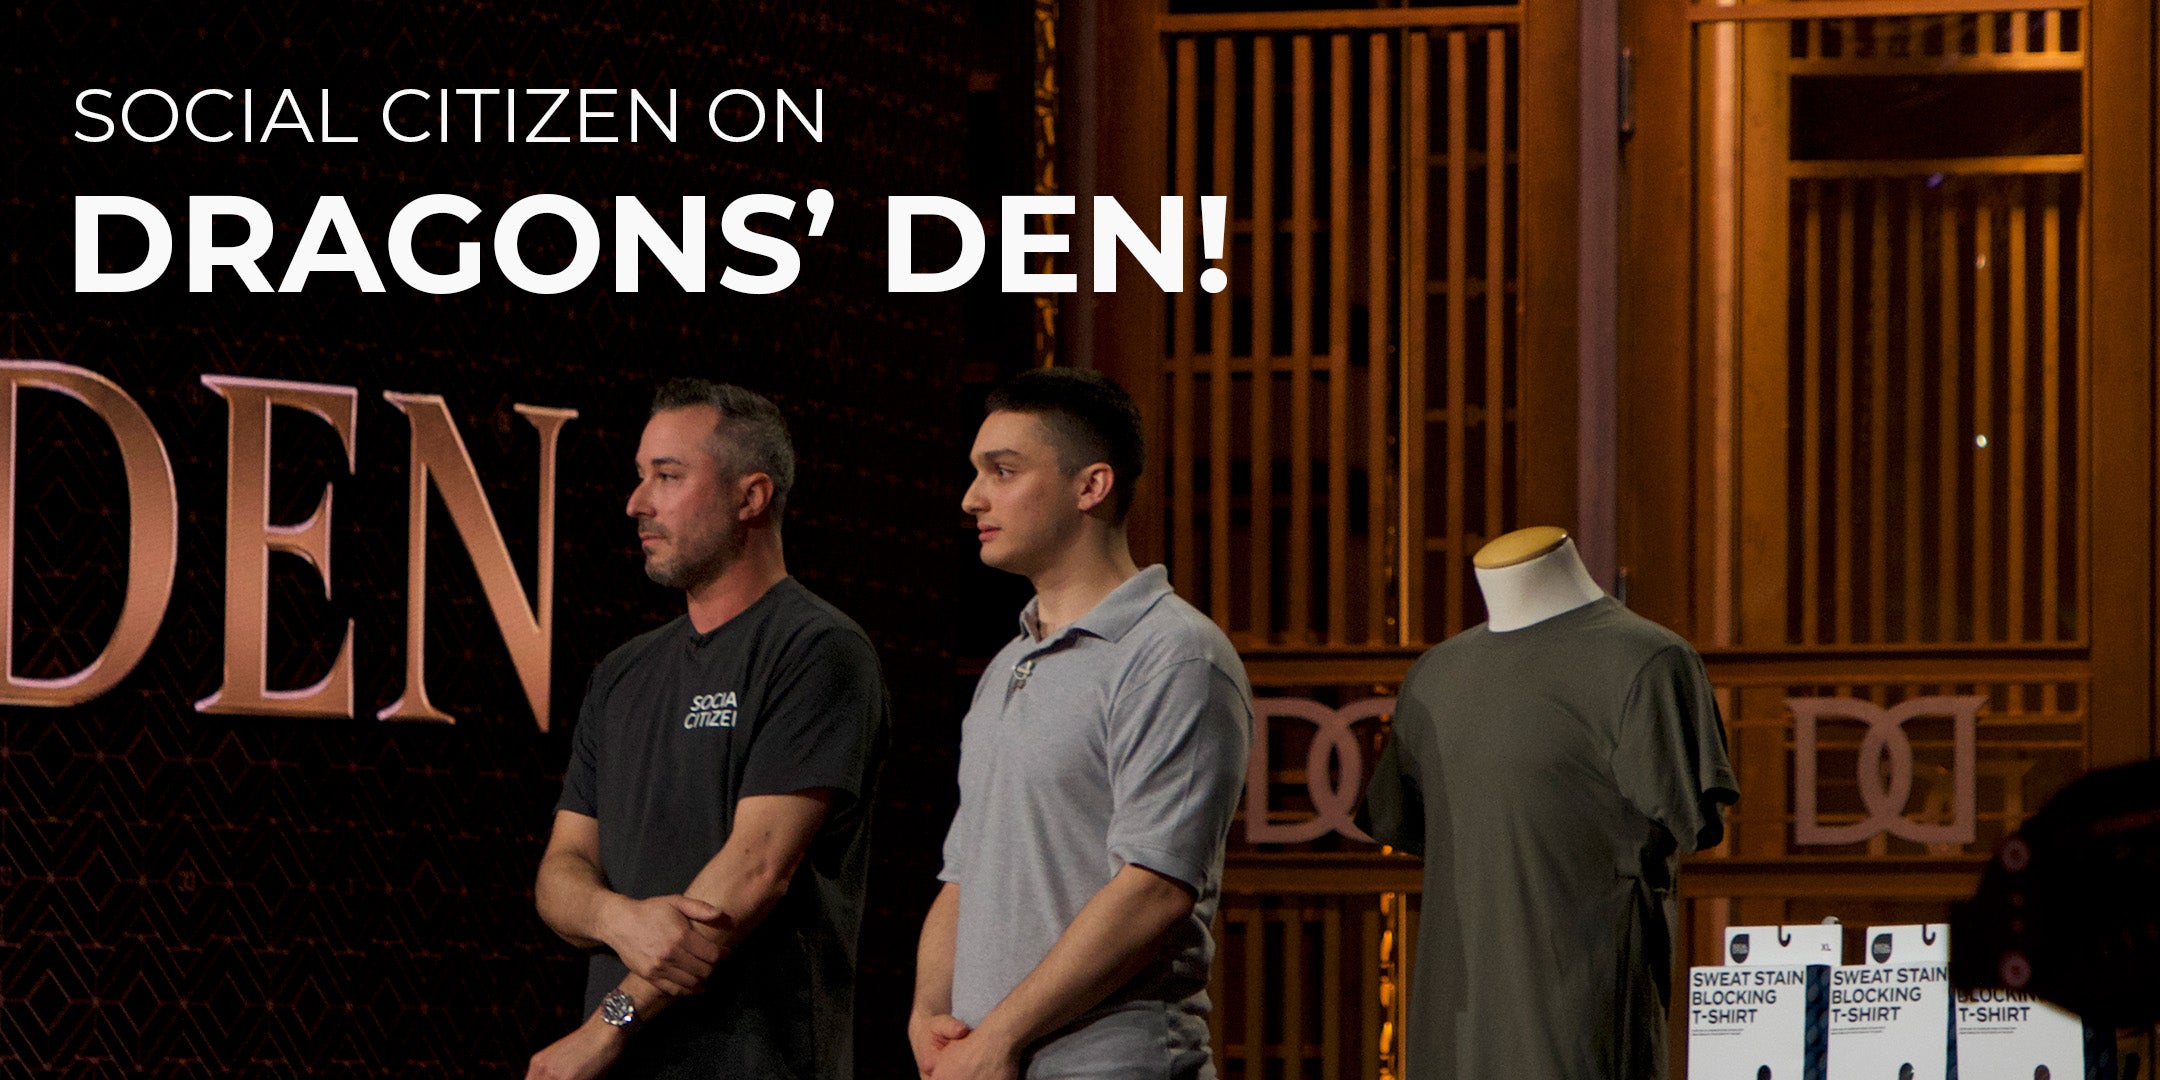 Sweat proof shirts featured on Dragons' Den TV show